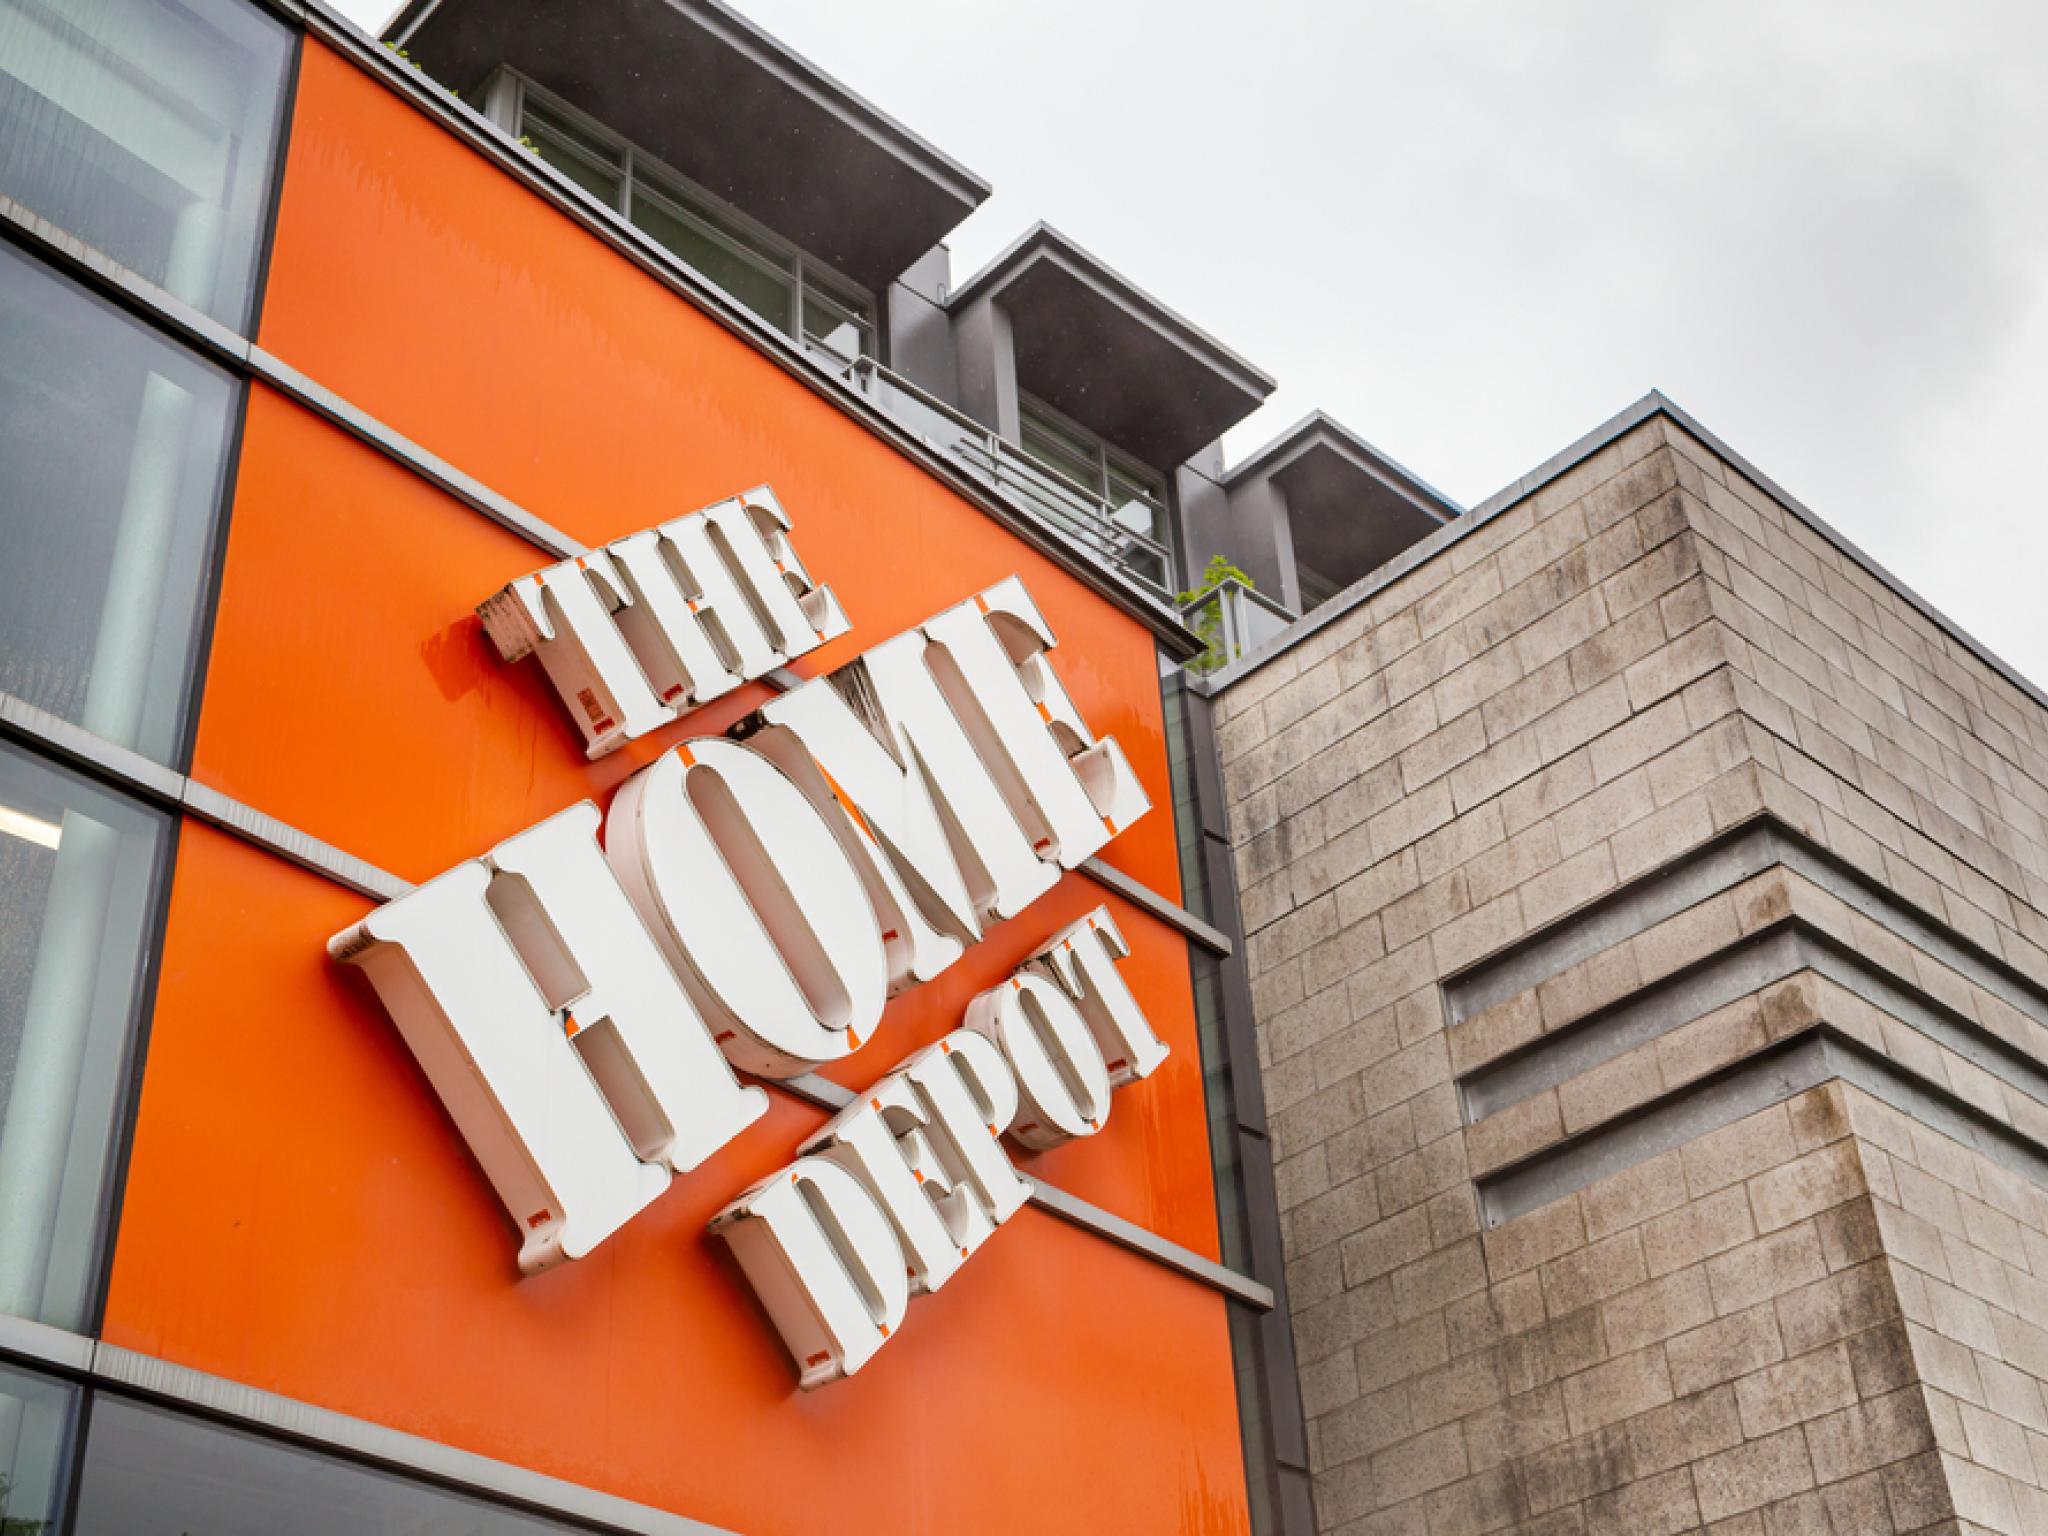  jim-cramer-tells-investors-to-hold-on-to-home-depot-despite-disappointing-quarter-management-deliberately-gave-a-conservative-forecast 